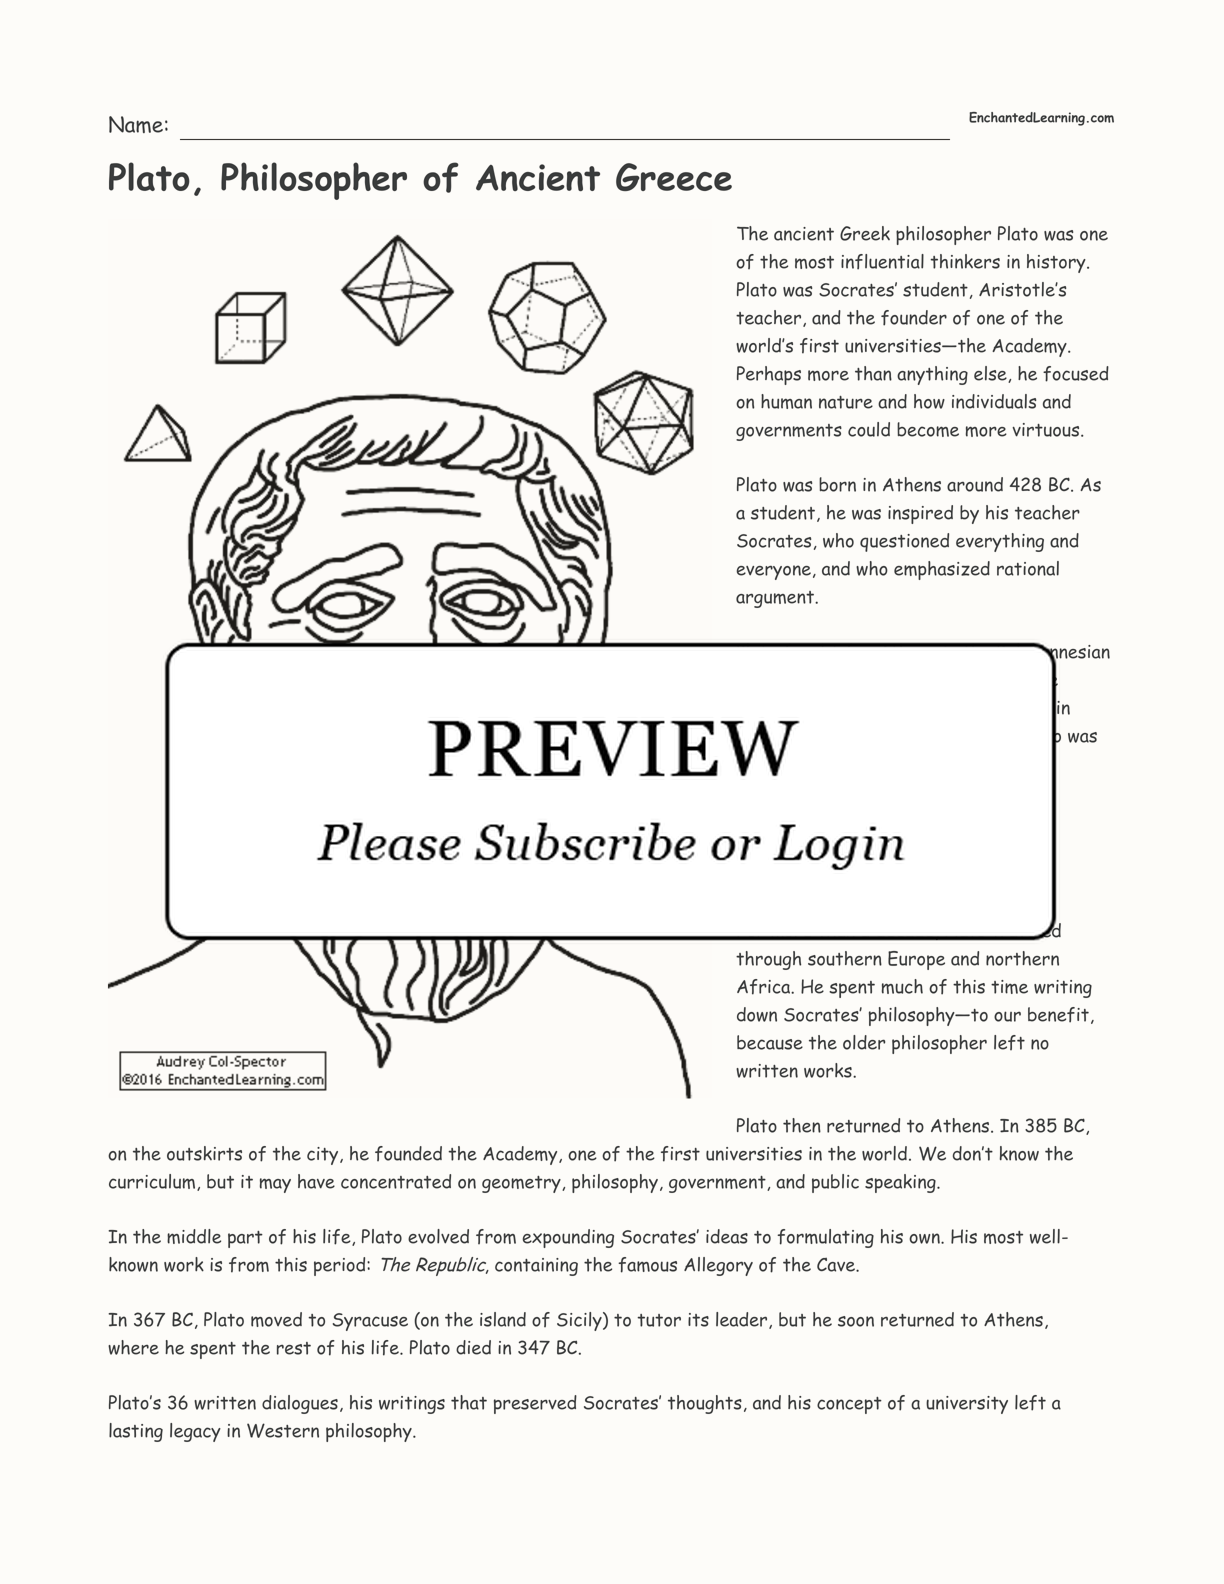 Plato, Philosopher of Ancient Greece interactive printout page 1